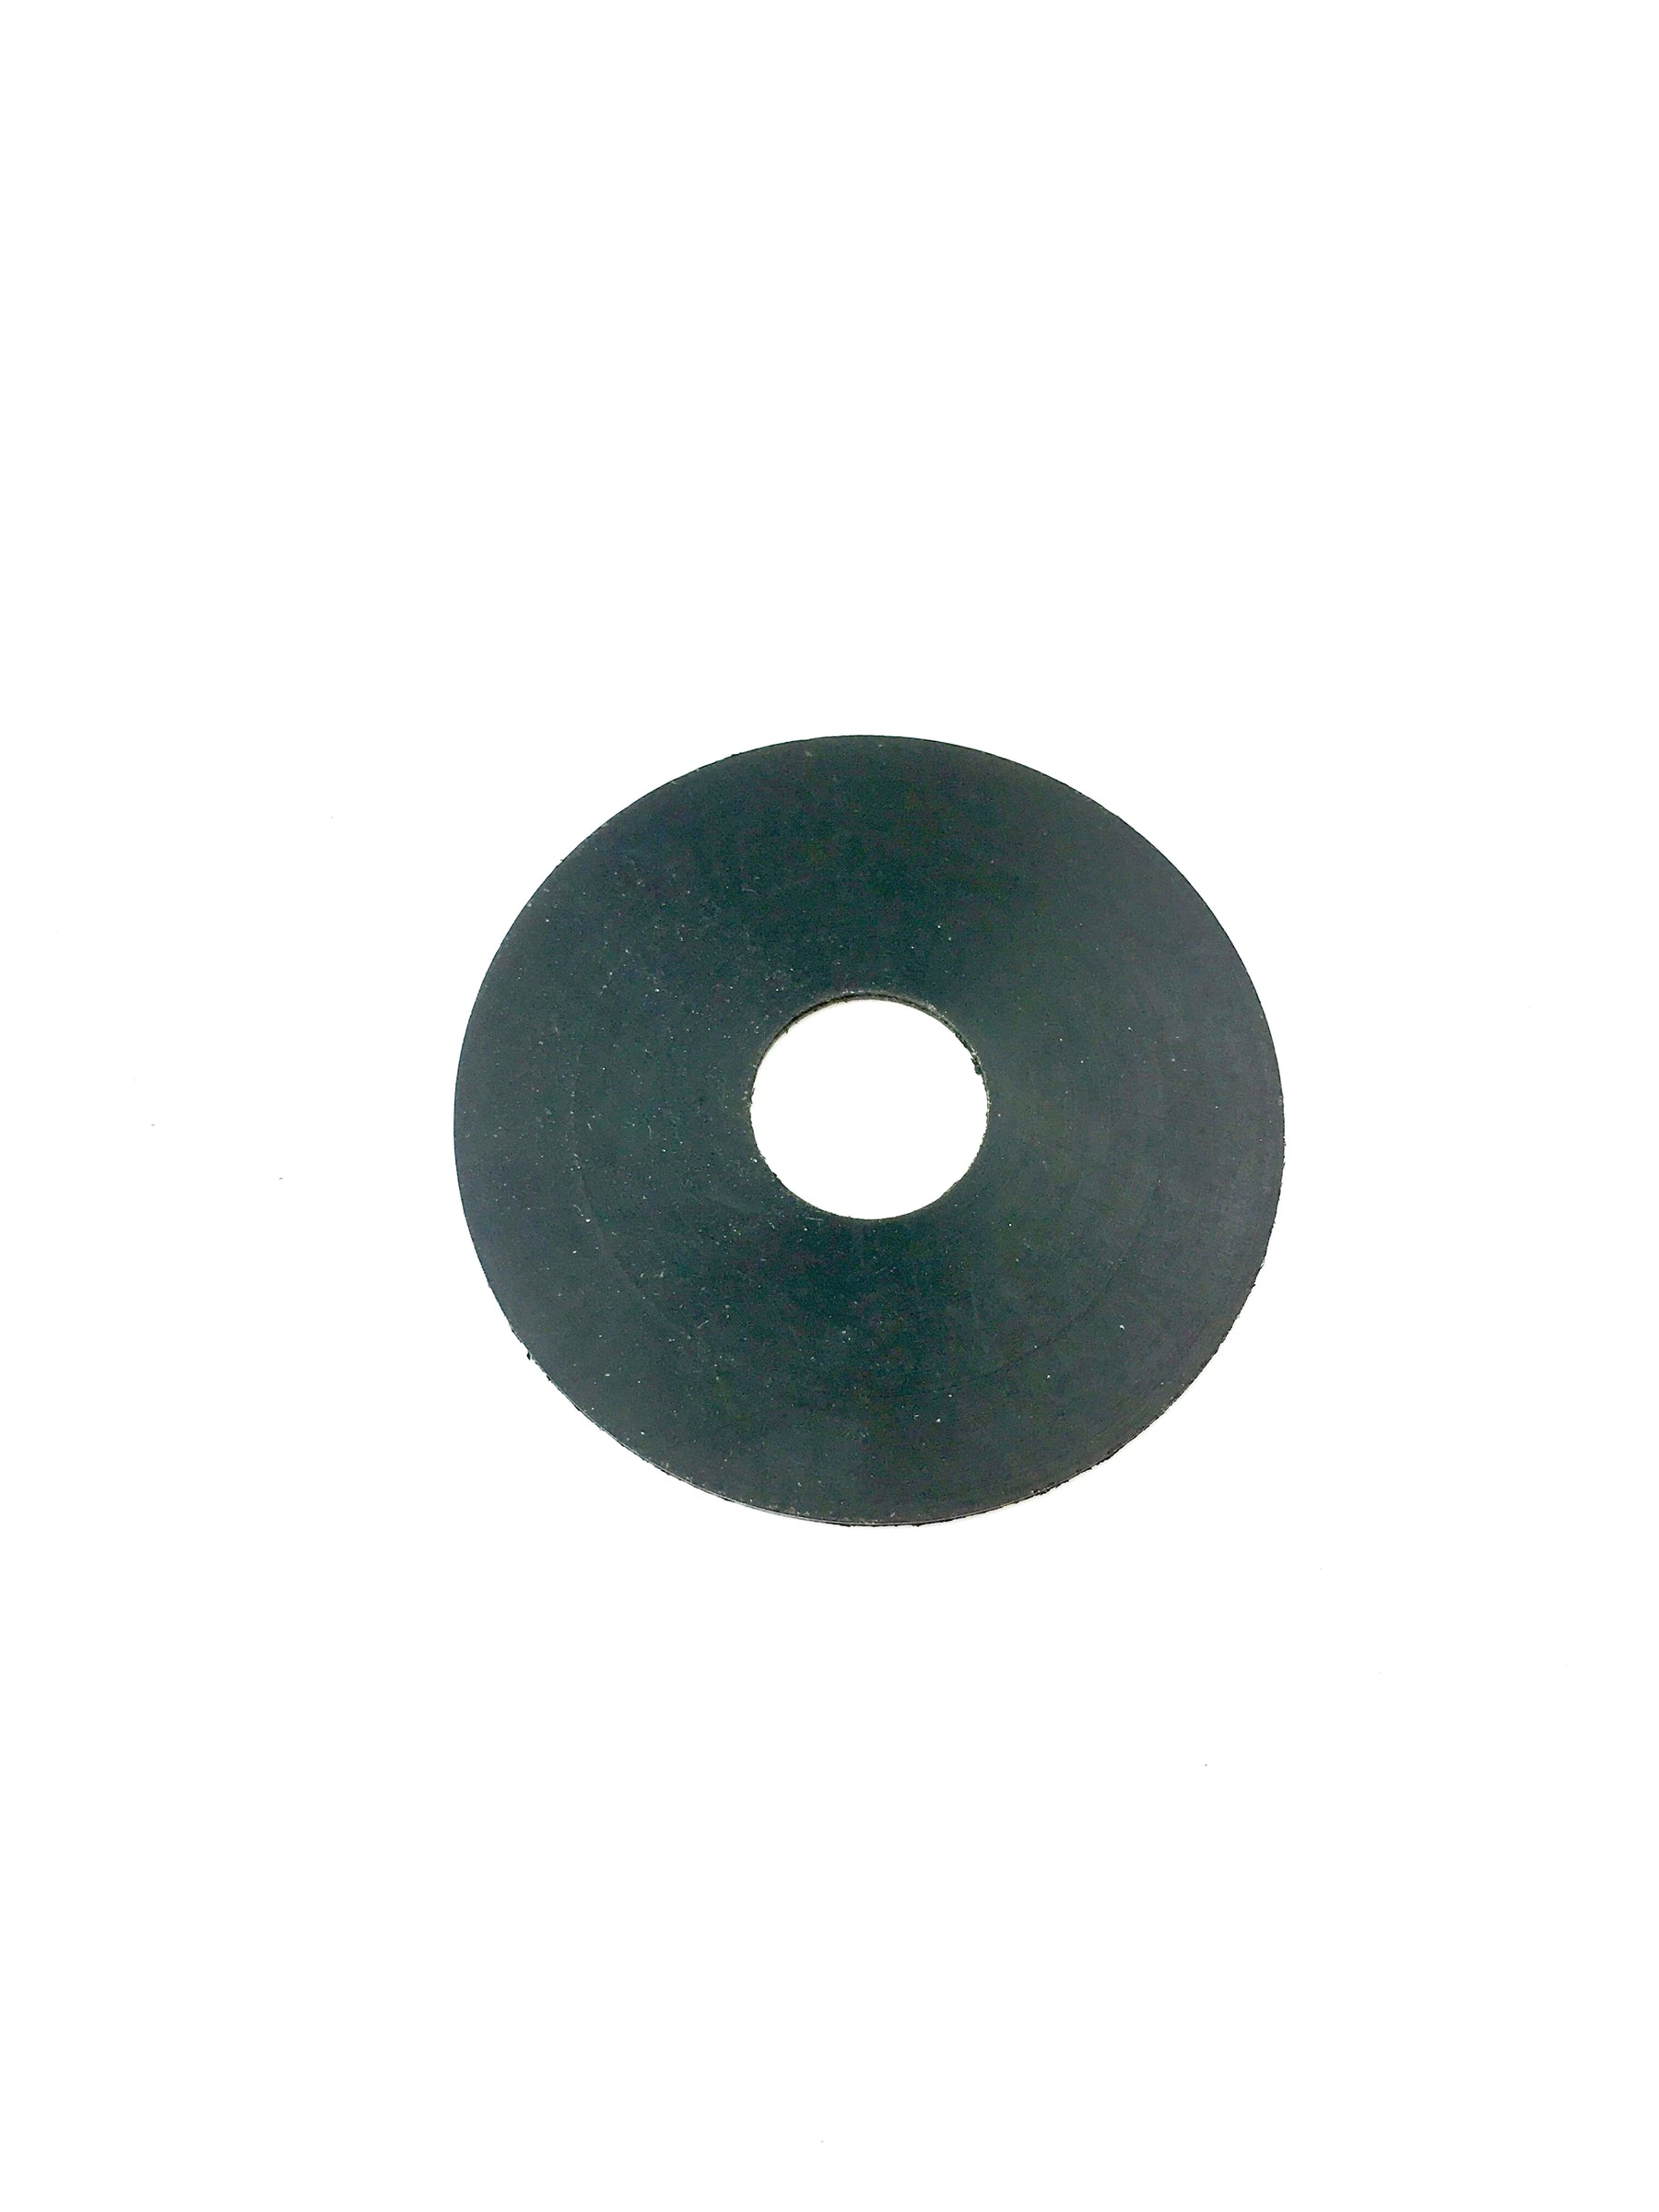 Vespa PX T5 Rally Oil Outlet Rubber Washer Gasket 1mm